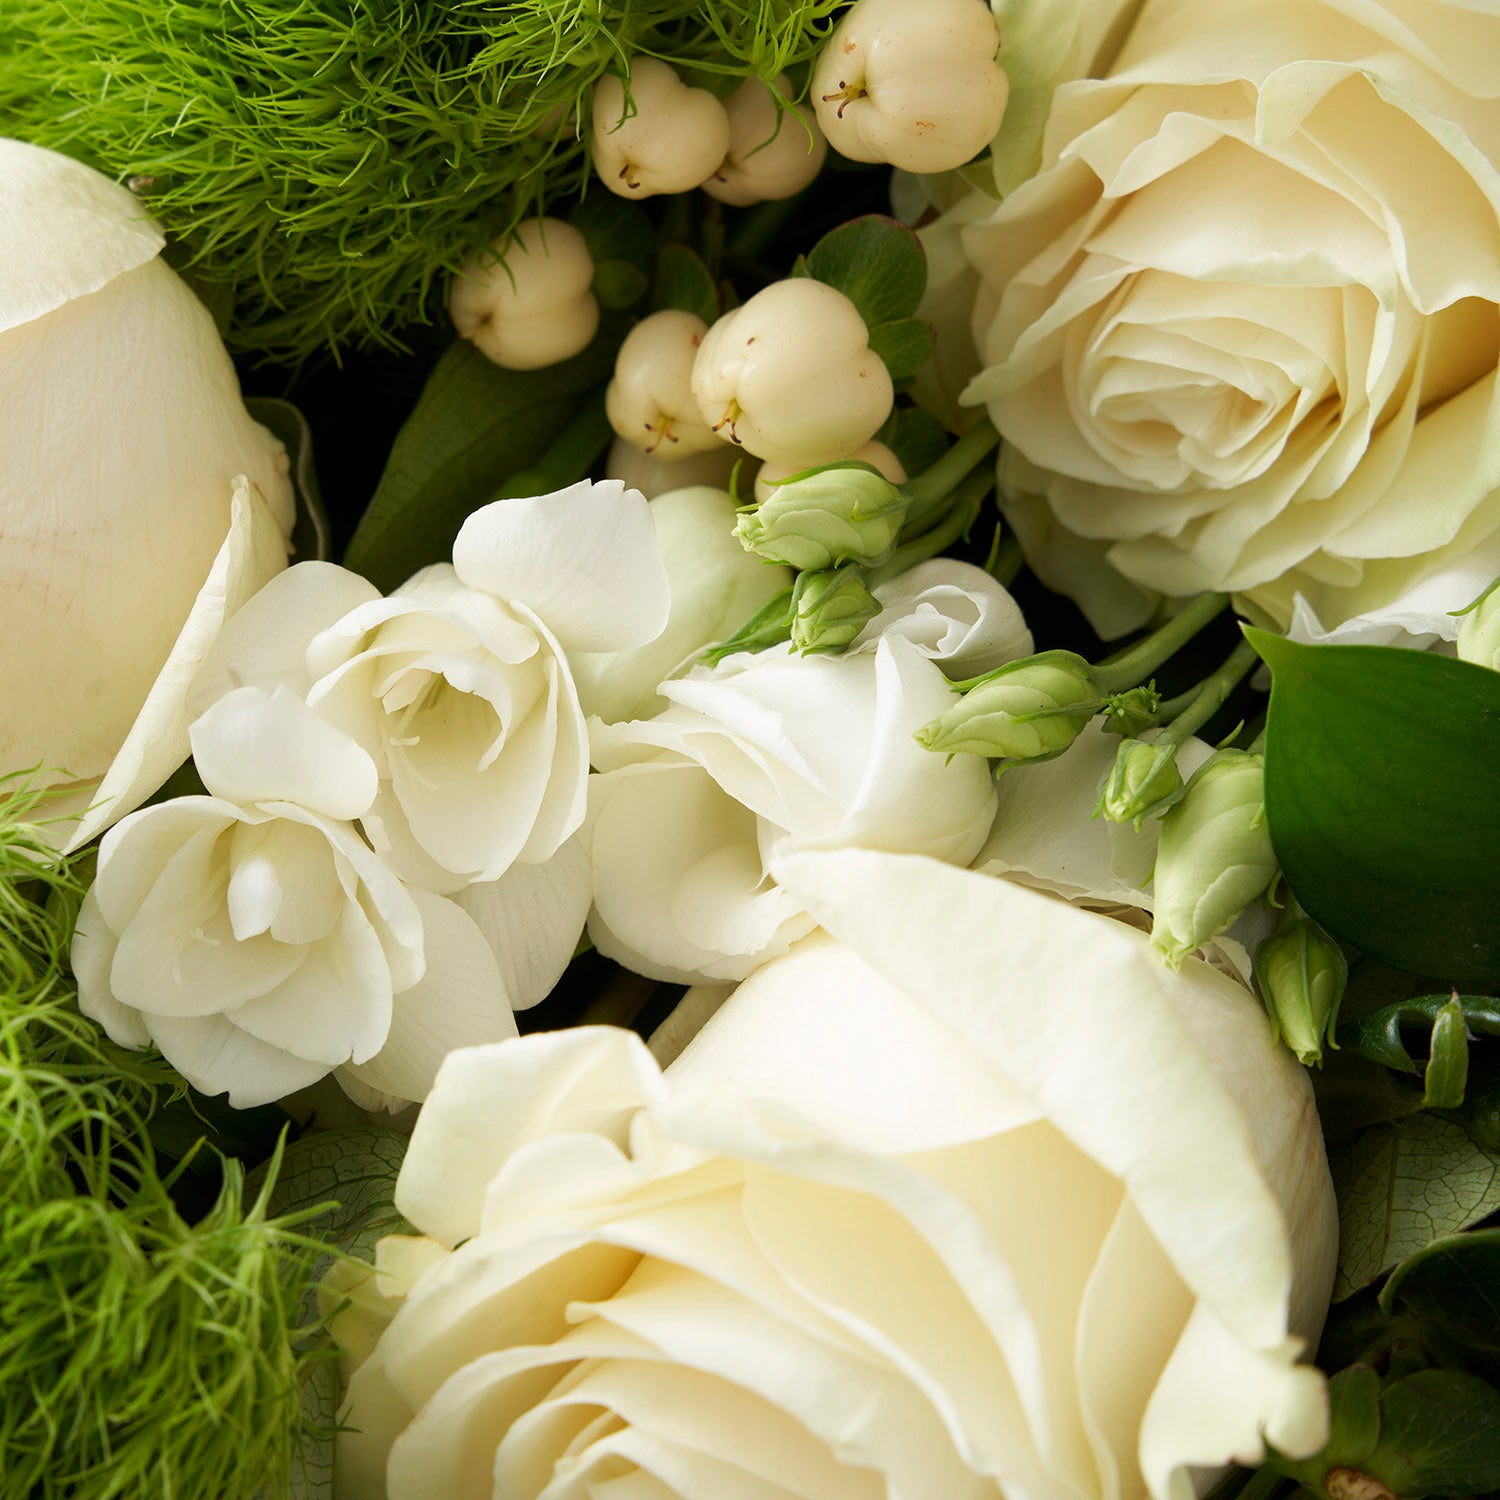 Closeup of white roses, white freesia, cream berries and green dianthus flowers.